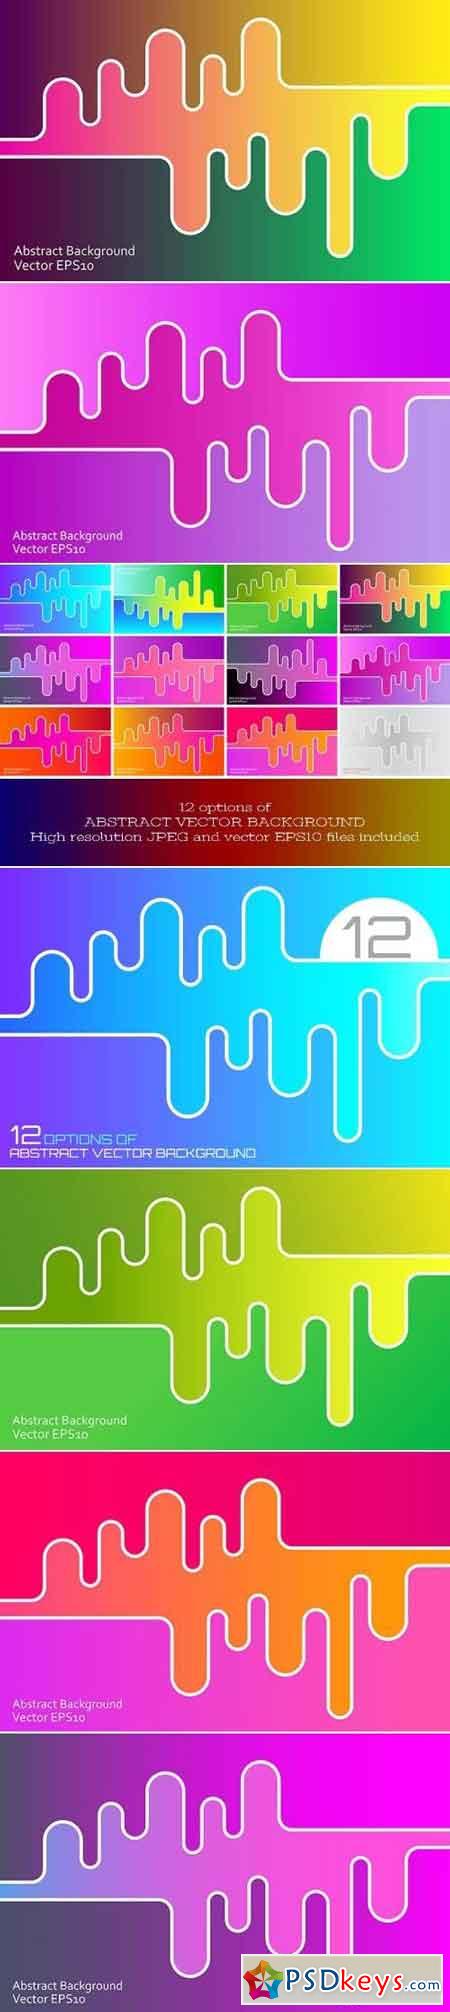 12 Abstract vector backgrounds with wave shape